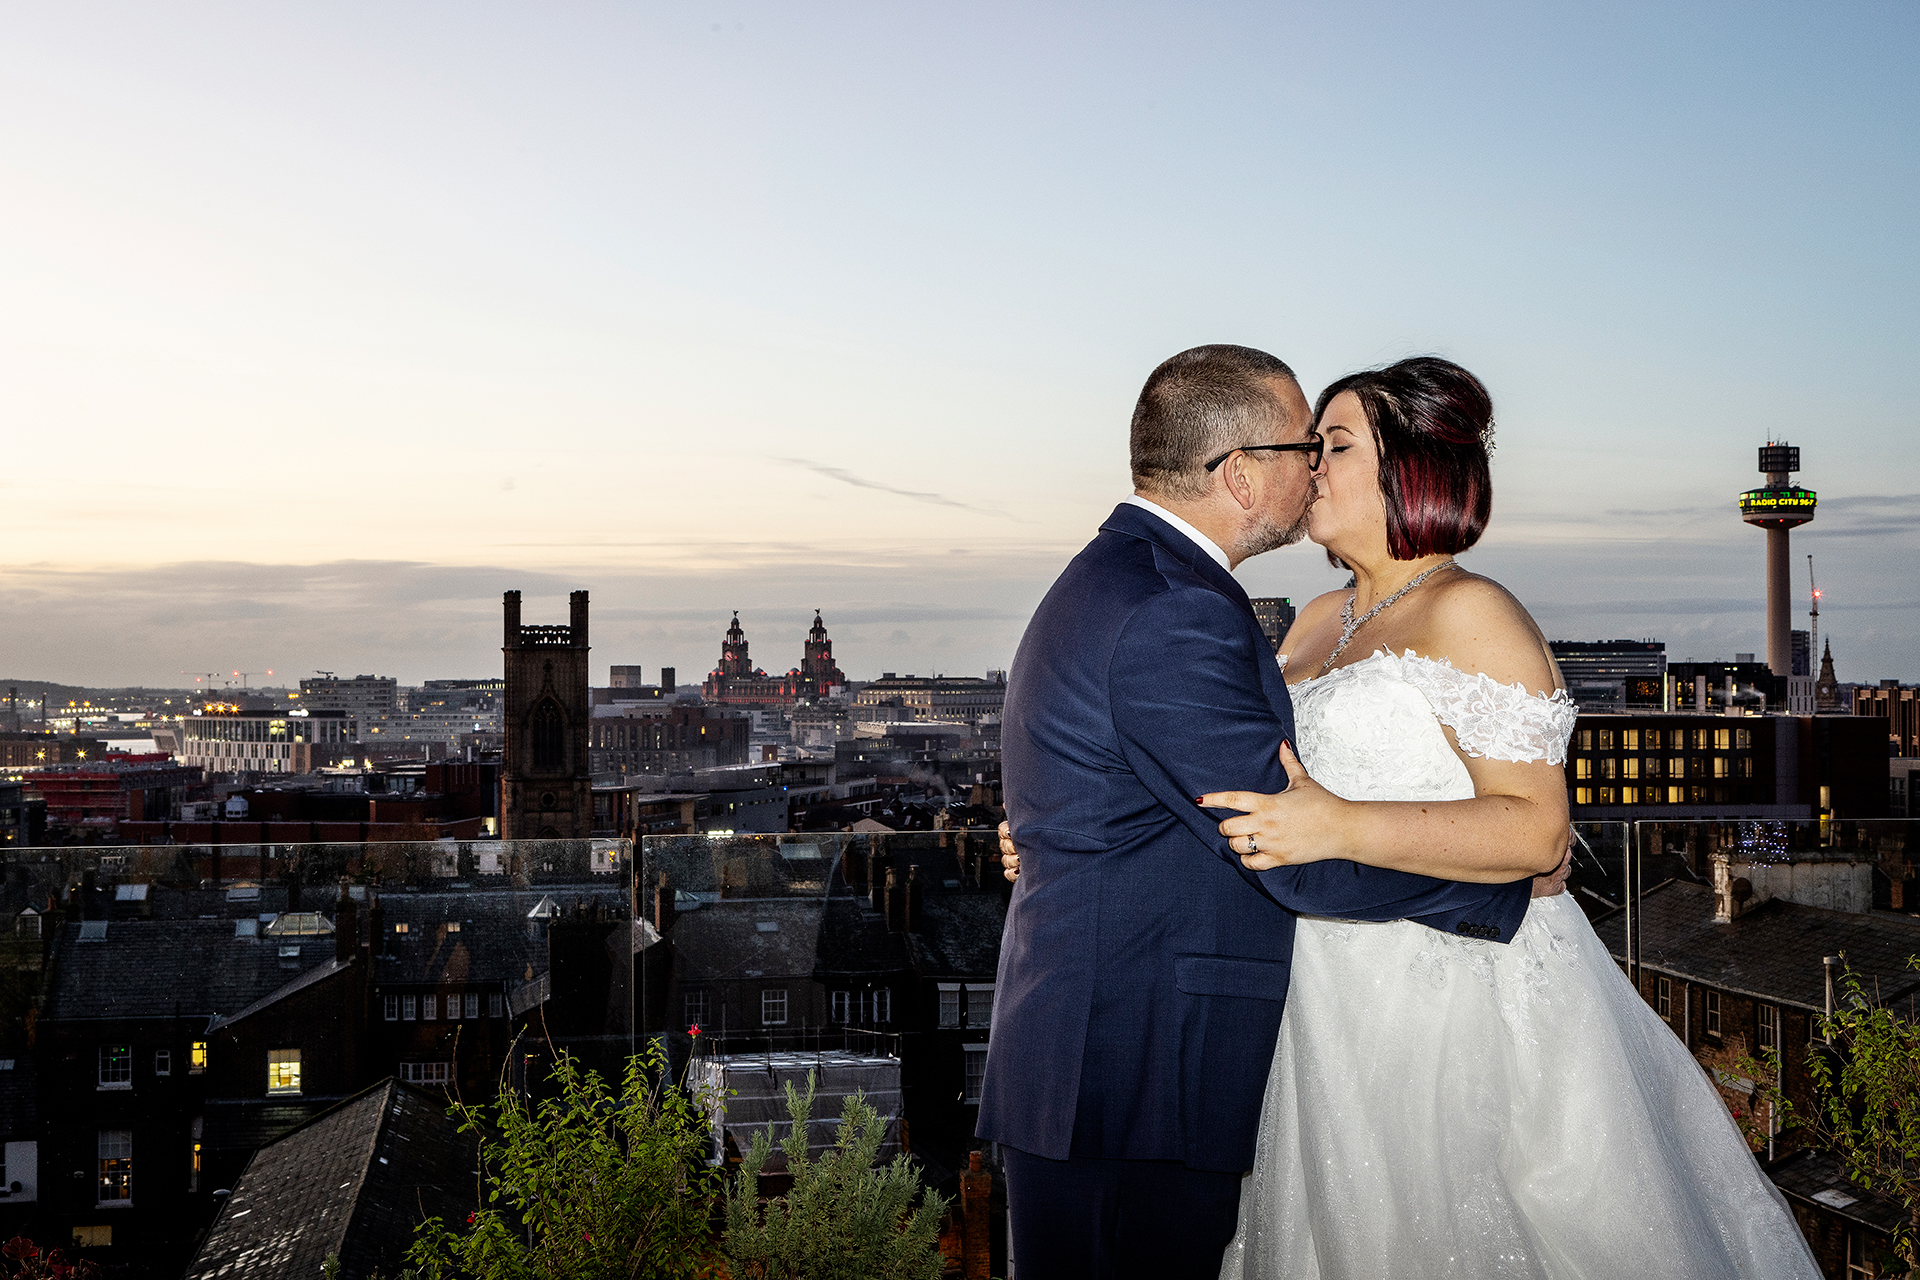 The bride and groom photographed at the Hope street hotel with the Liverpool city skyline